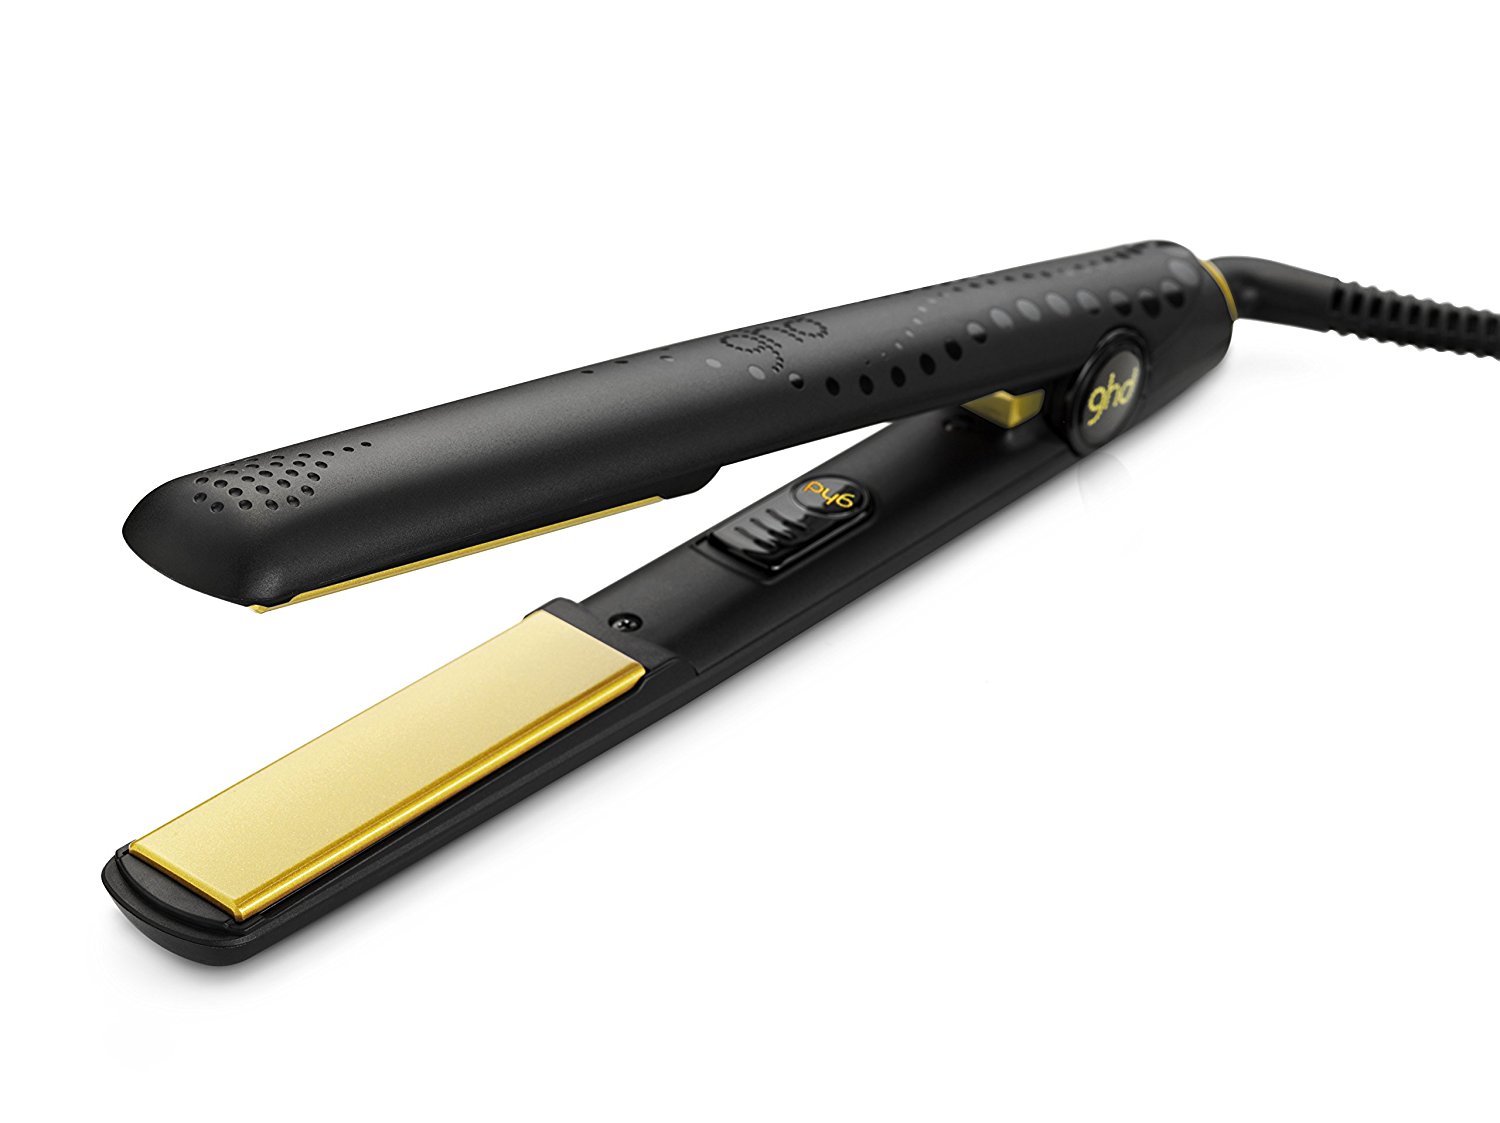 GHD Lisseur Gold Classic (Styler®)